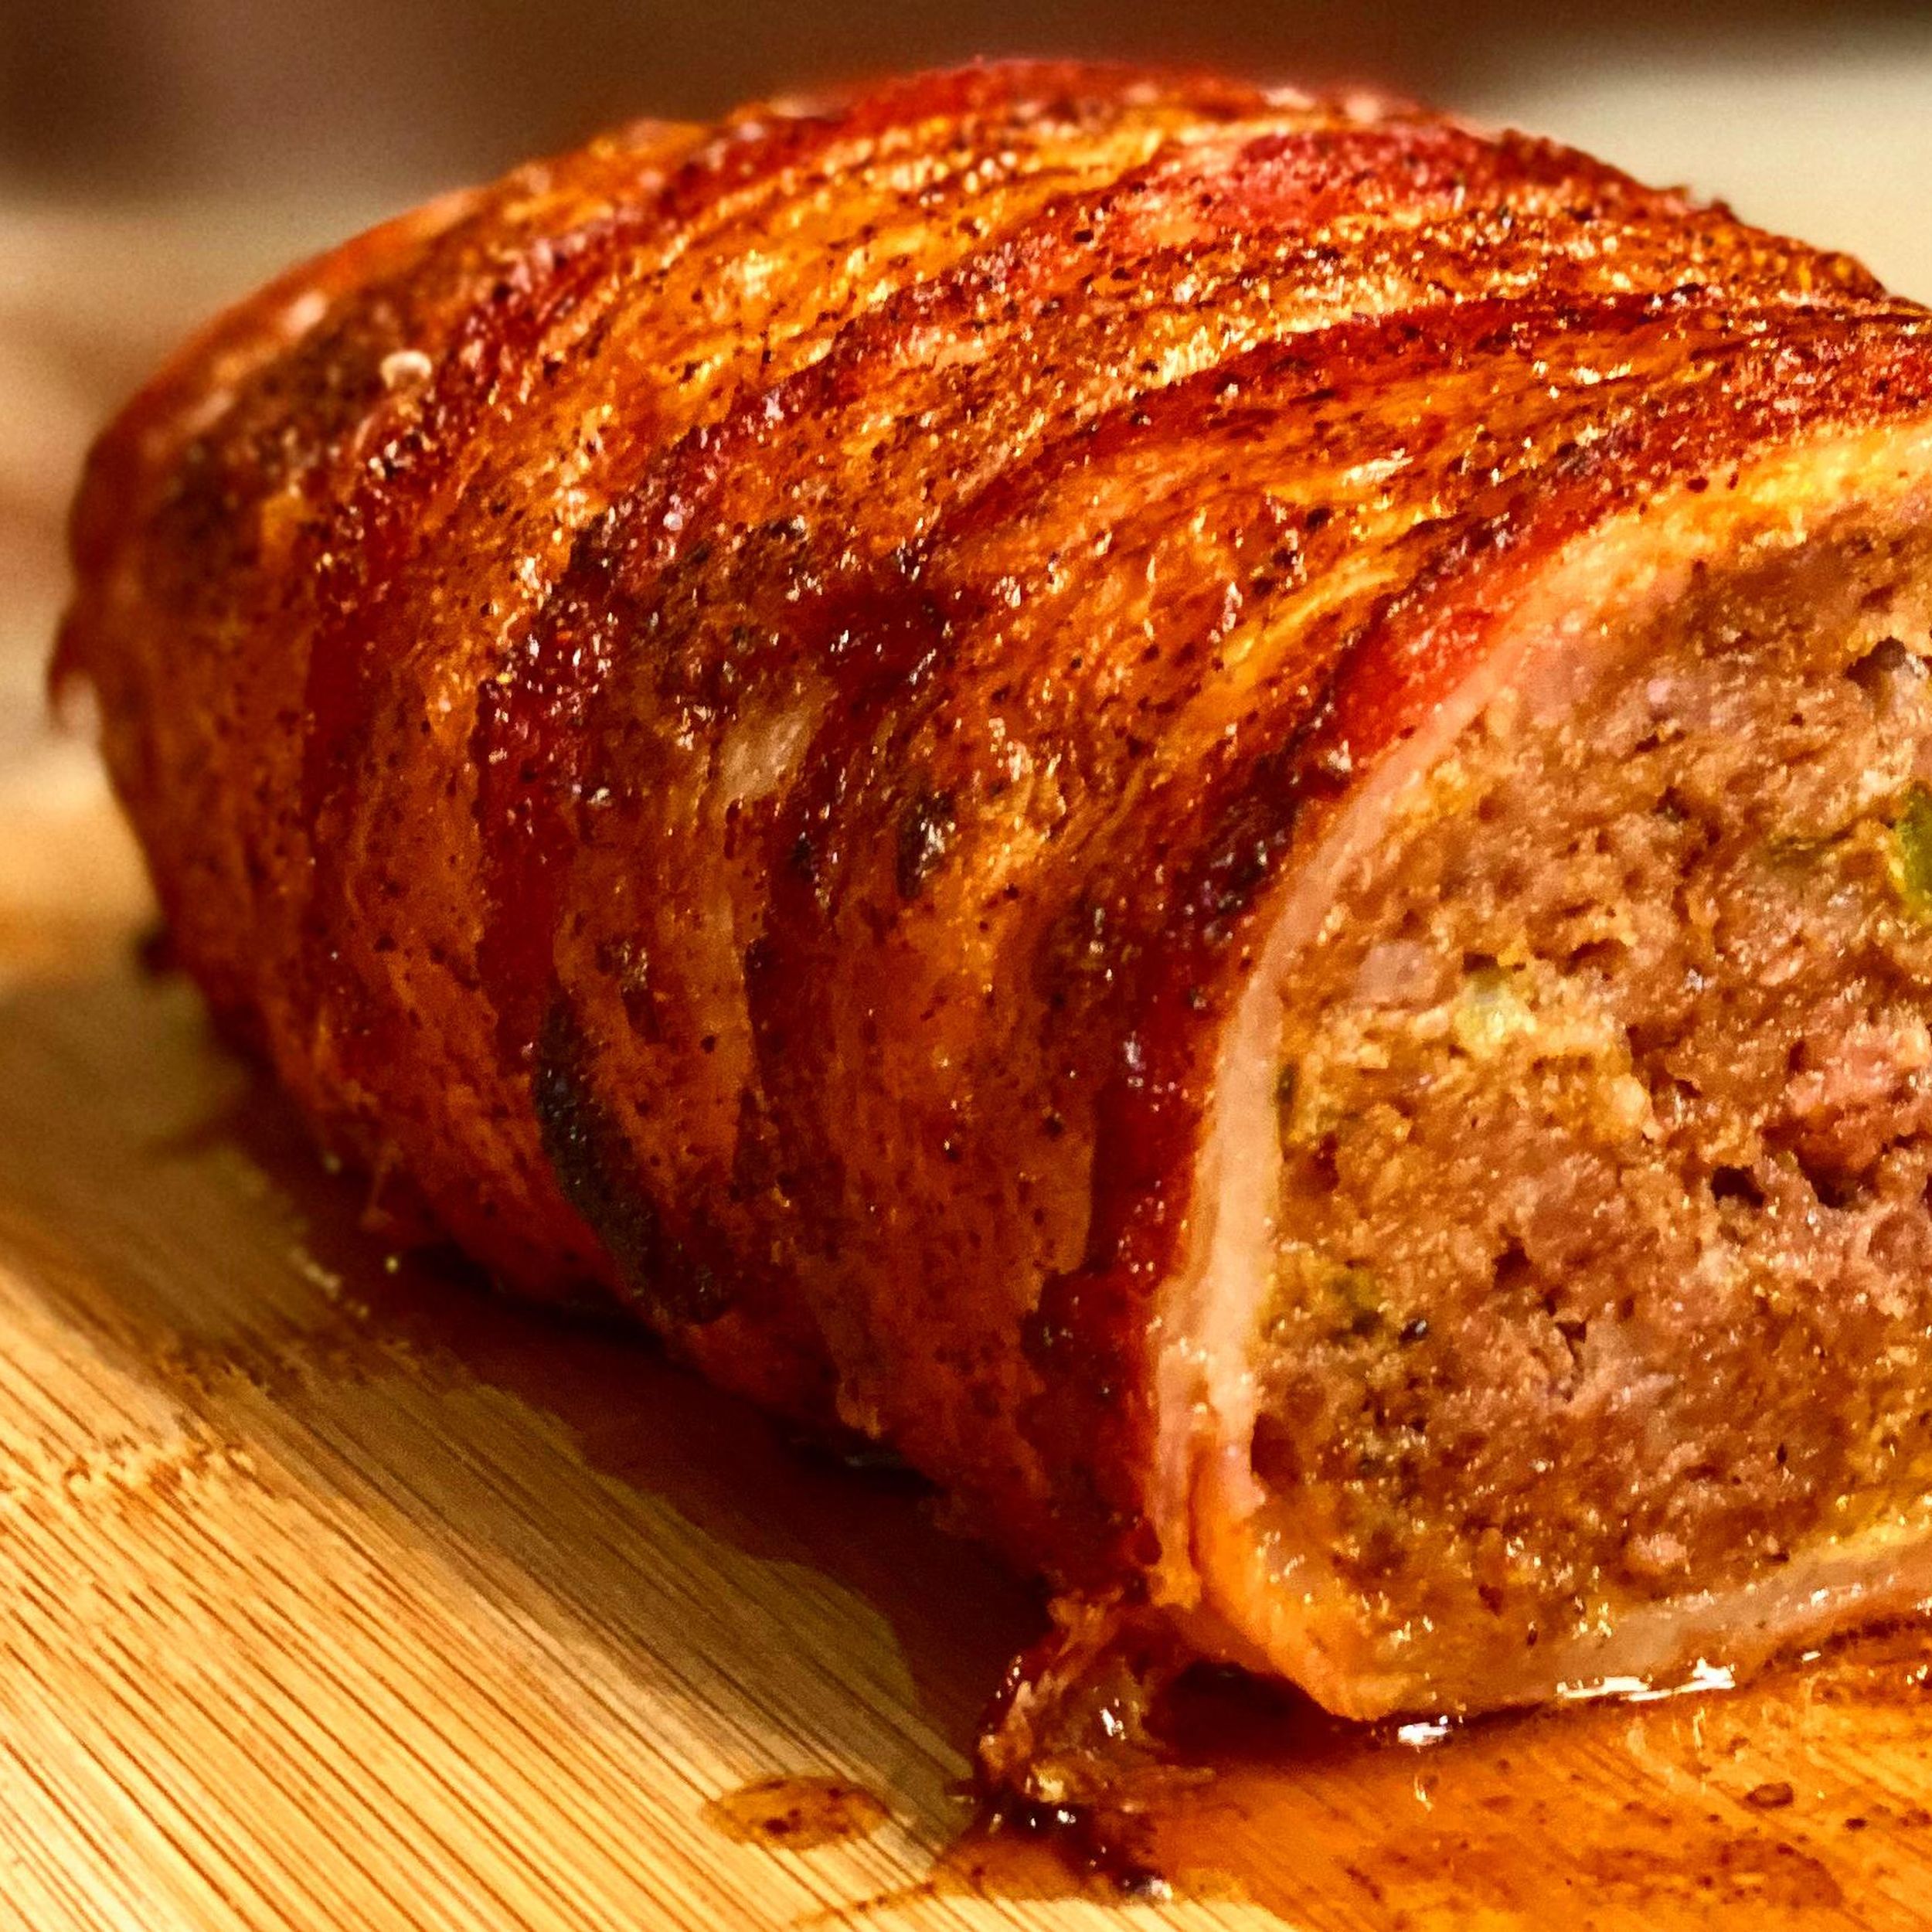 How Long To Cook A 2 Pound Meatloaf At 325 Degrees - The 7 ...